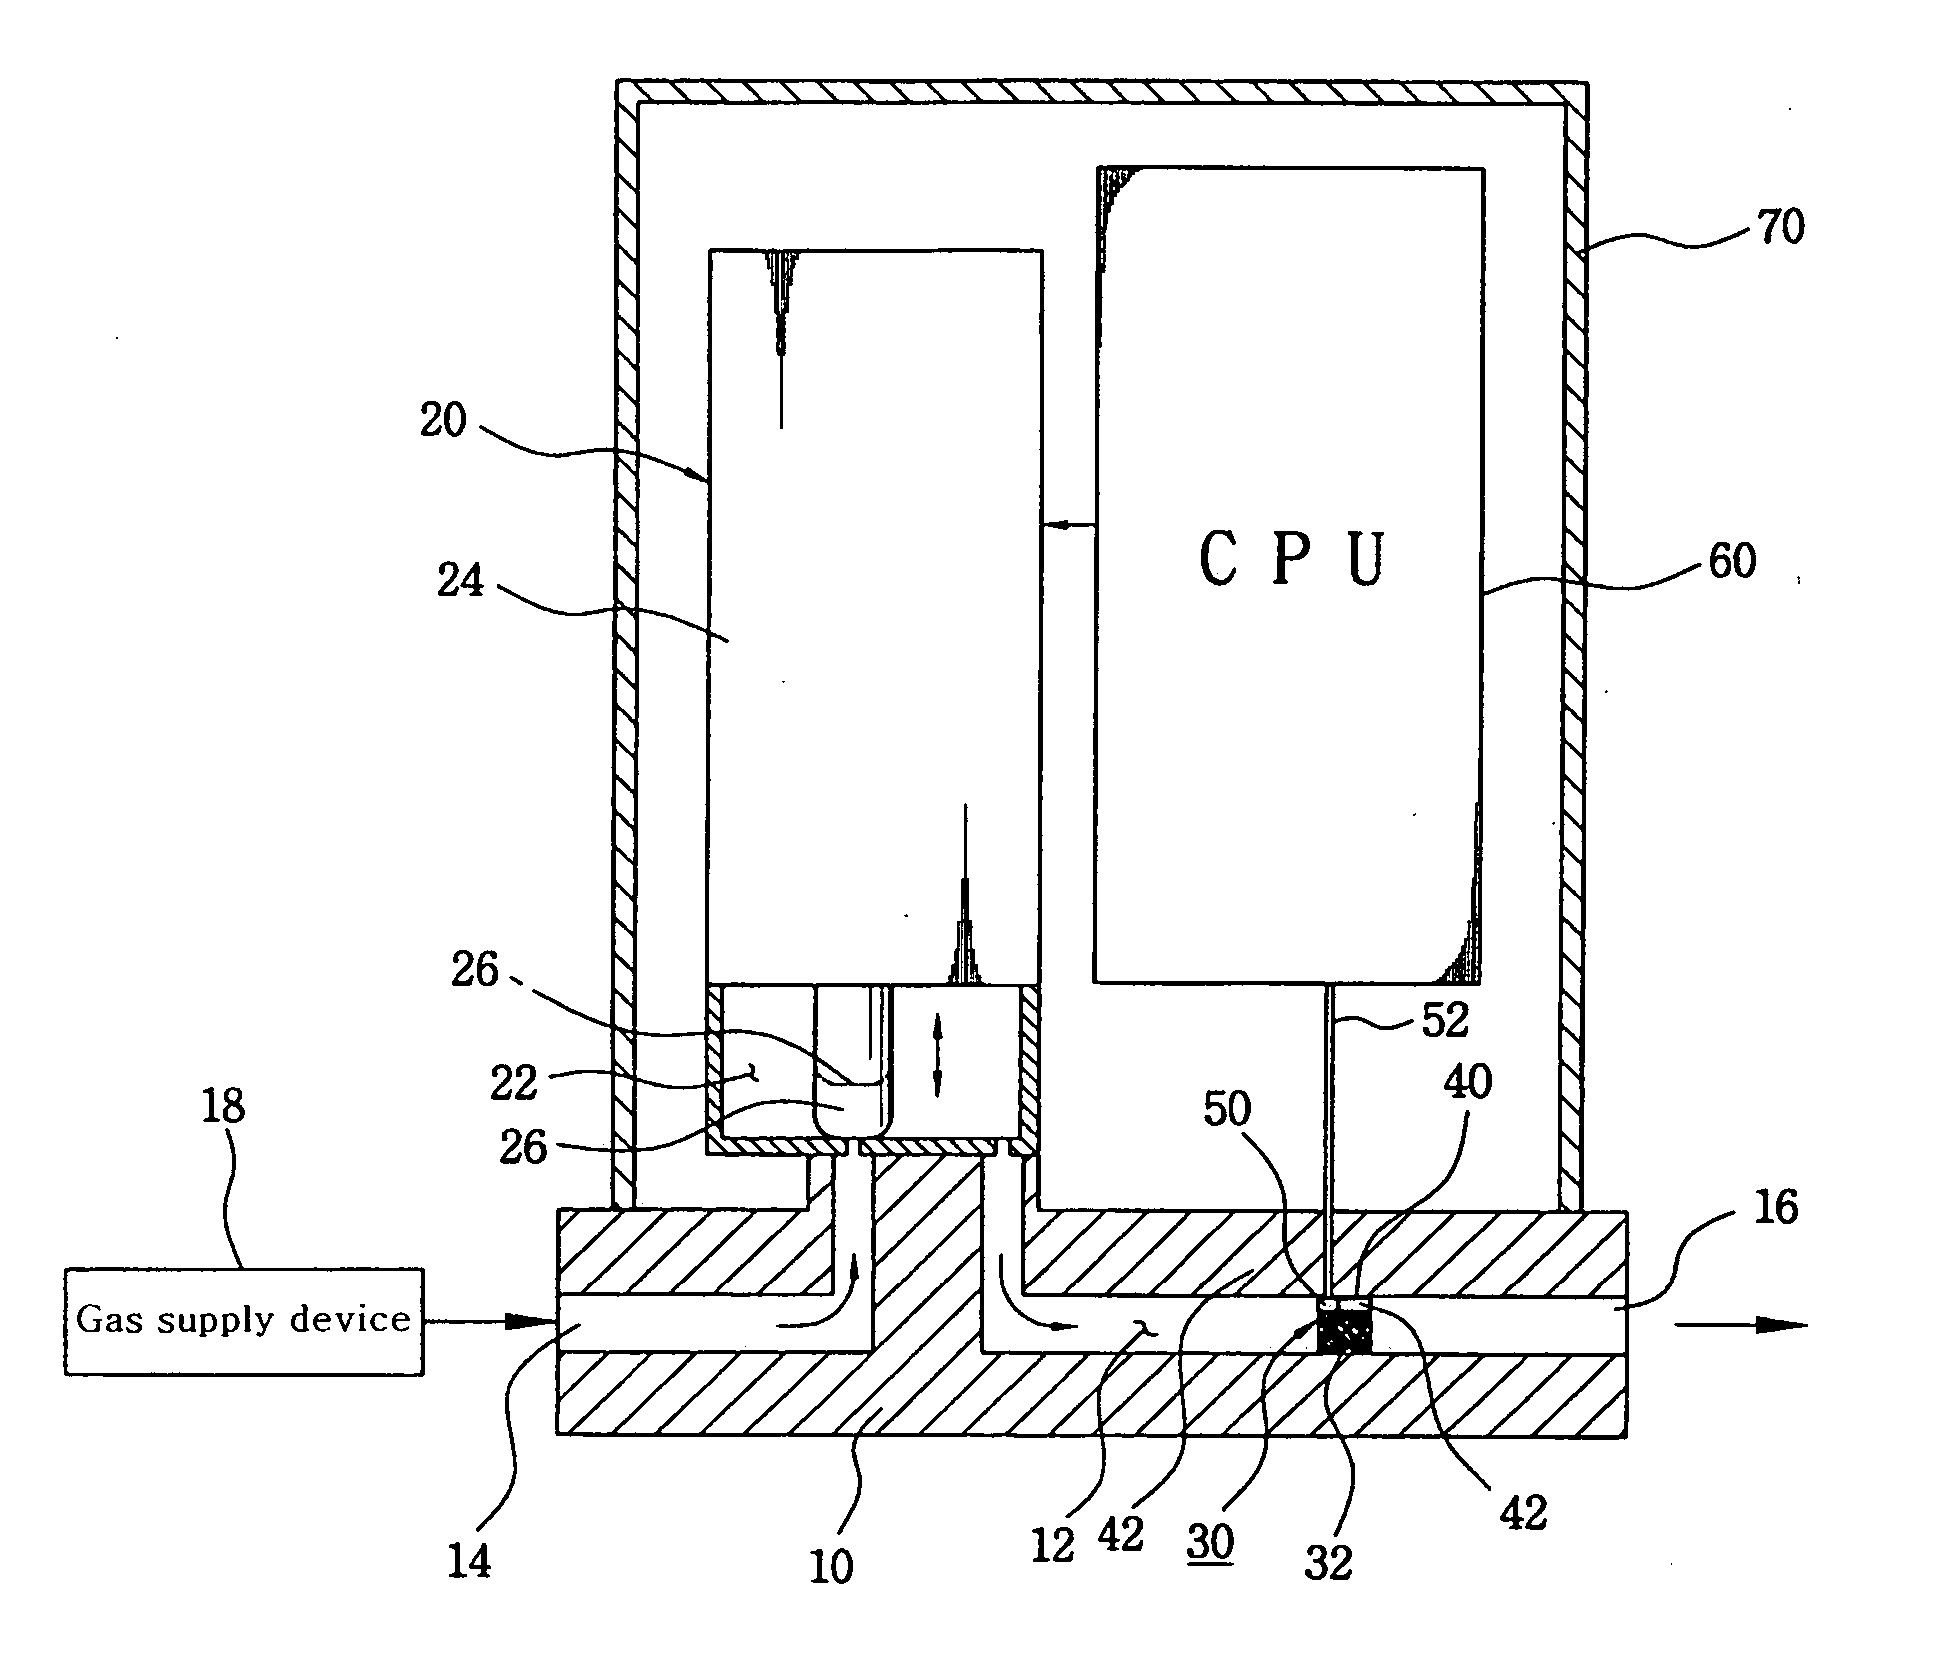 Apparatus for controlling flow rate of gases used in semiconductor deivce by differential pressure